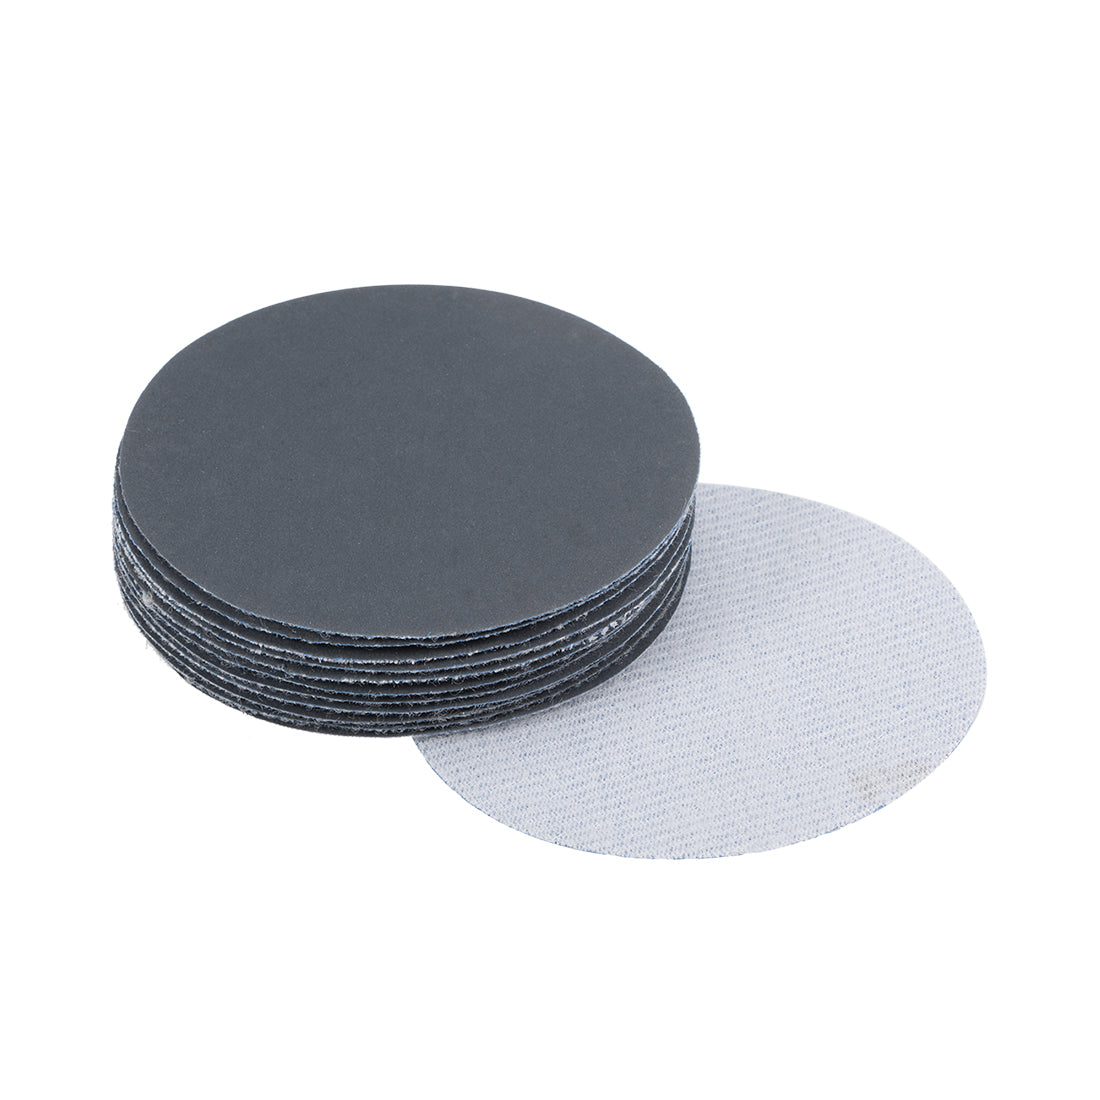 Uxcell Uxcell 3-inch Hook and Loop Sanding Disc Wet / Dry Silicon Carbide 1500 Grit 12 Pcs